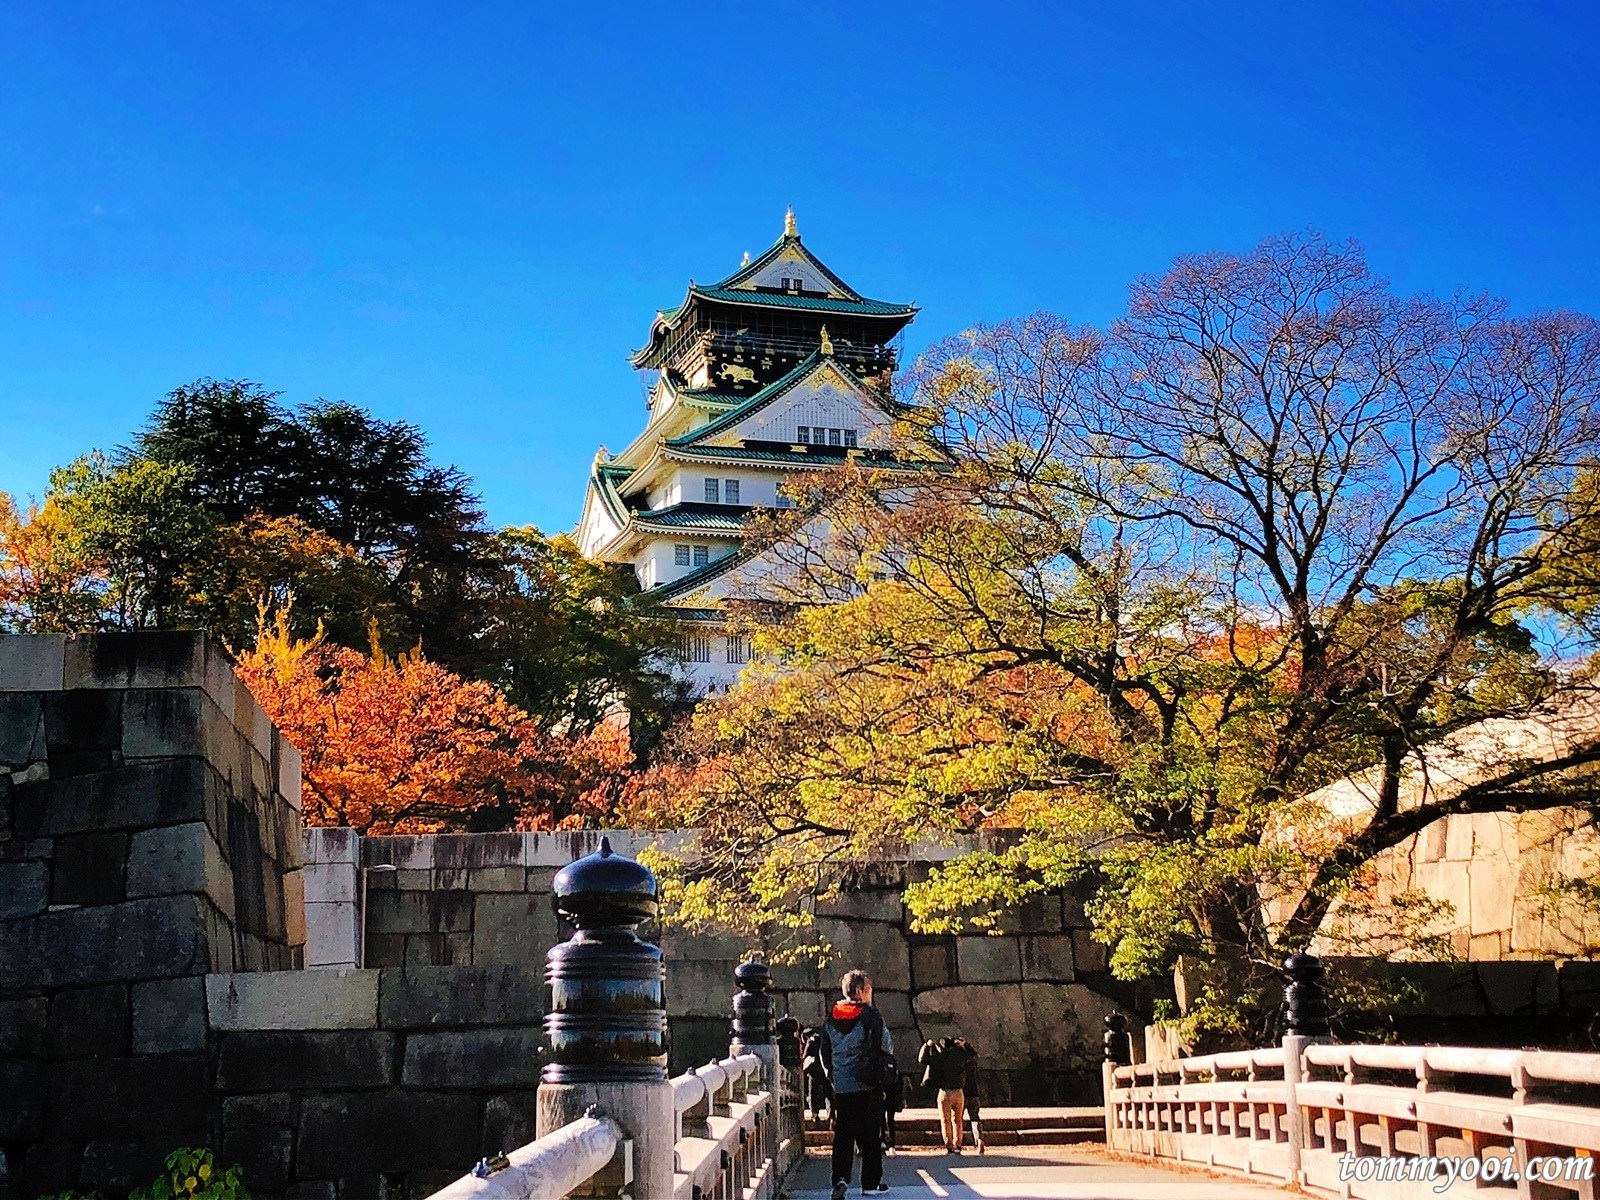 The perfect 7 night Japan itinerary for the adventure lovers